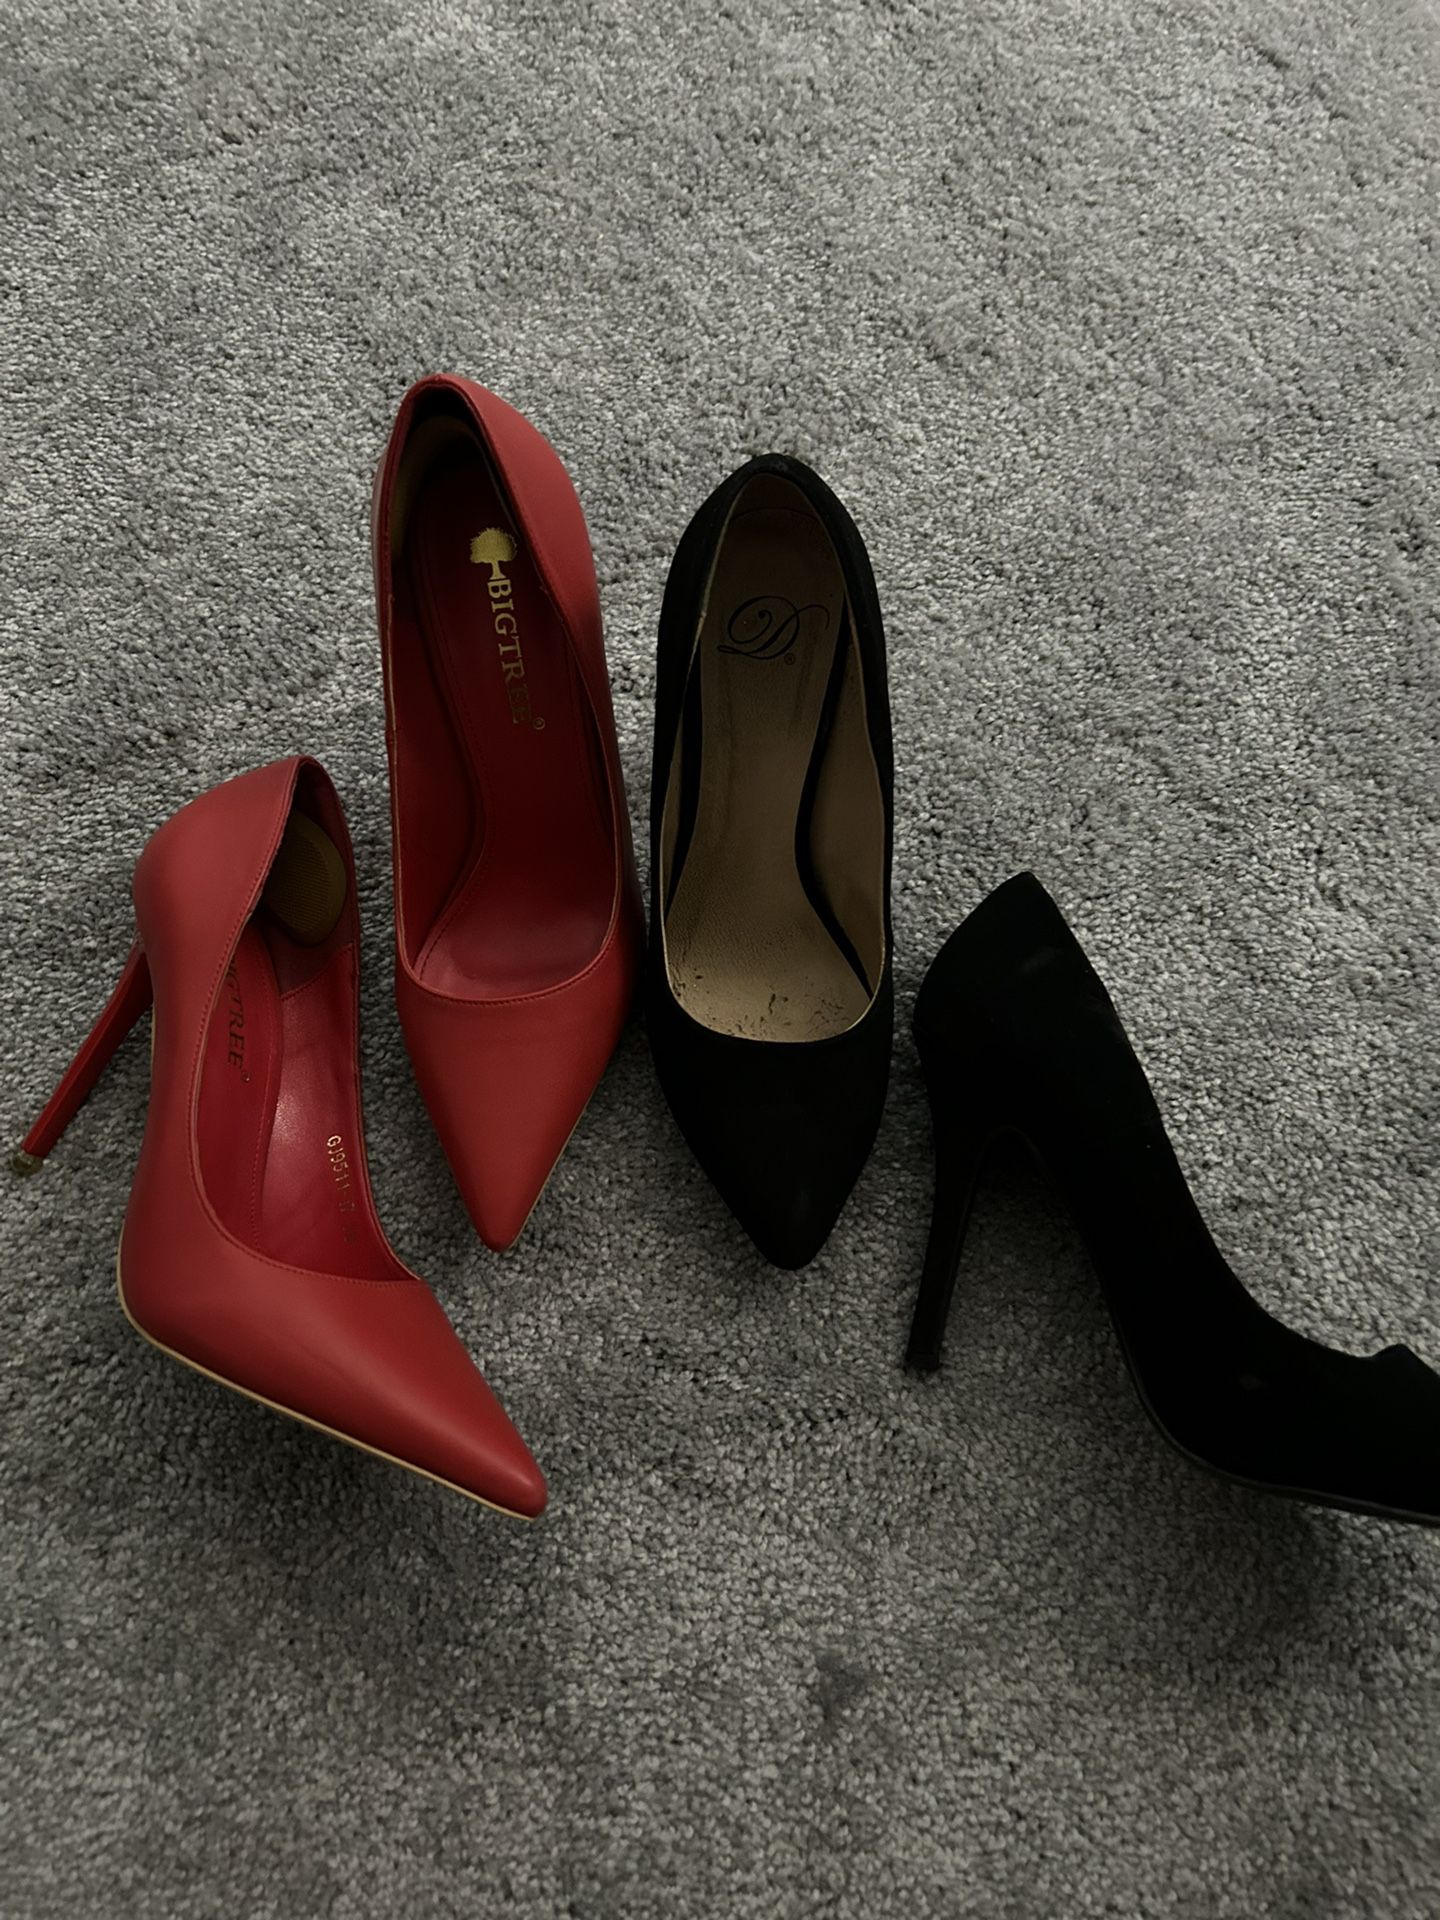 Women high heels red one is size 7.5 and black one is size 7